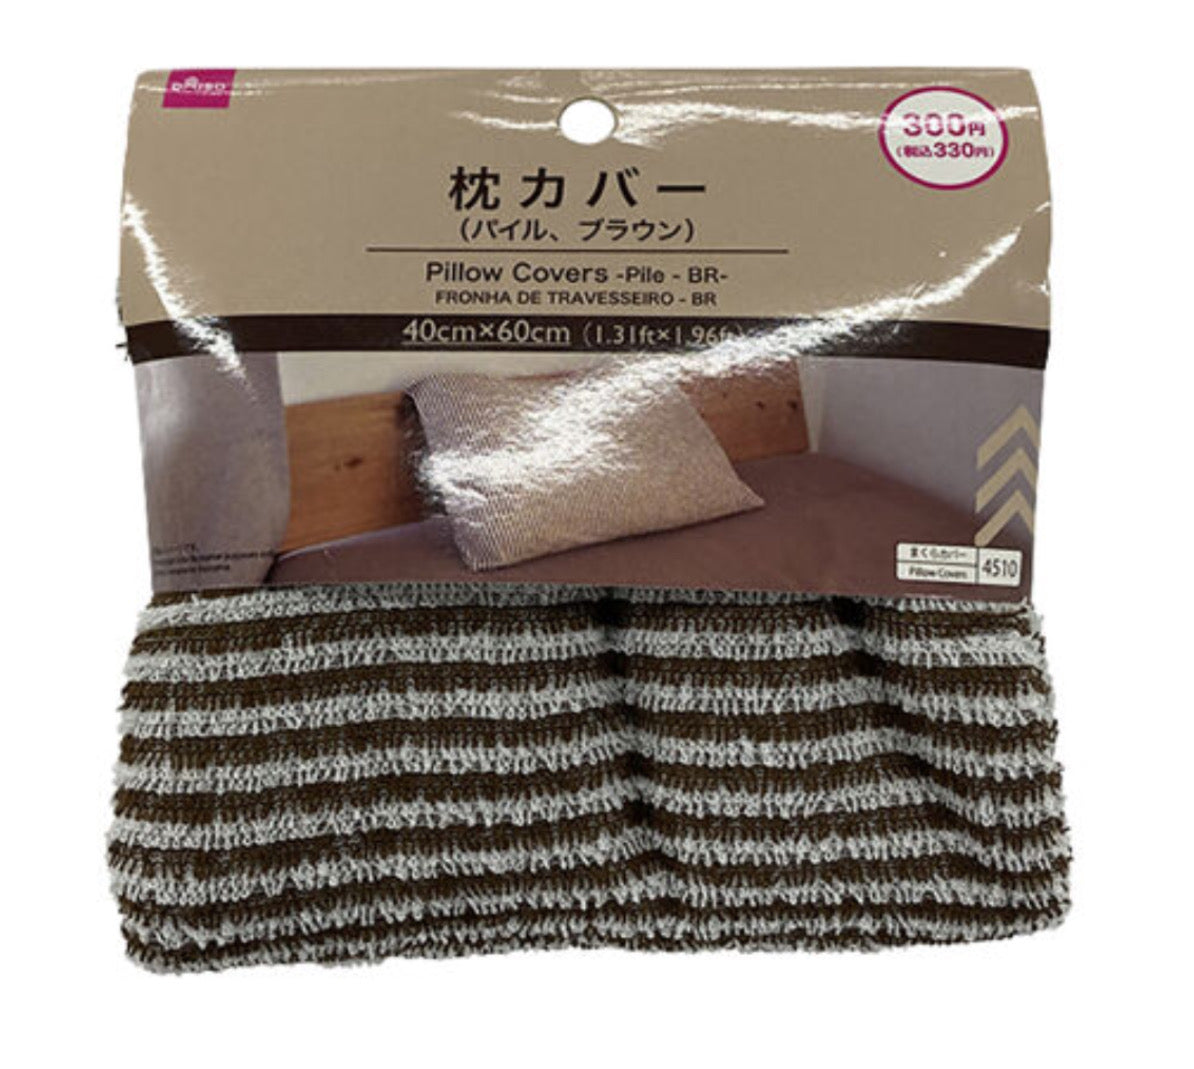 Pillow Cover - Pile